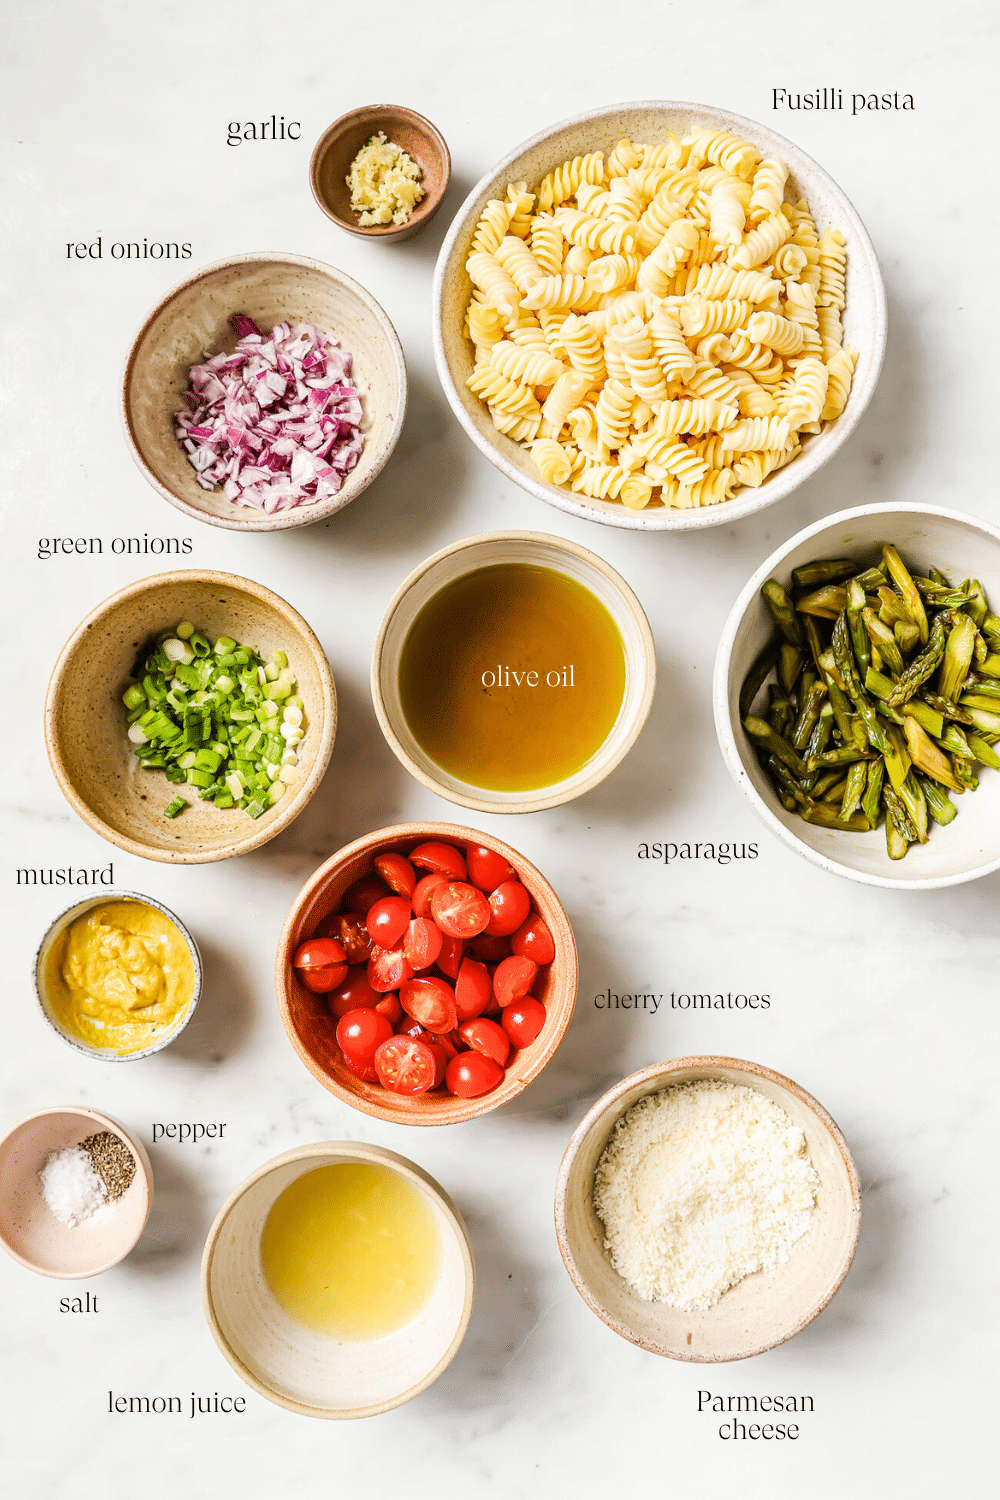 Small bowls of pre-measured ingredients. 